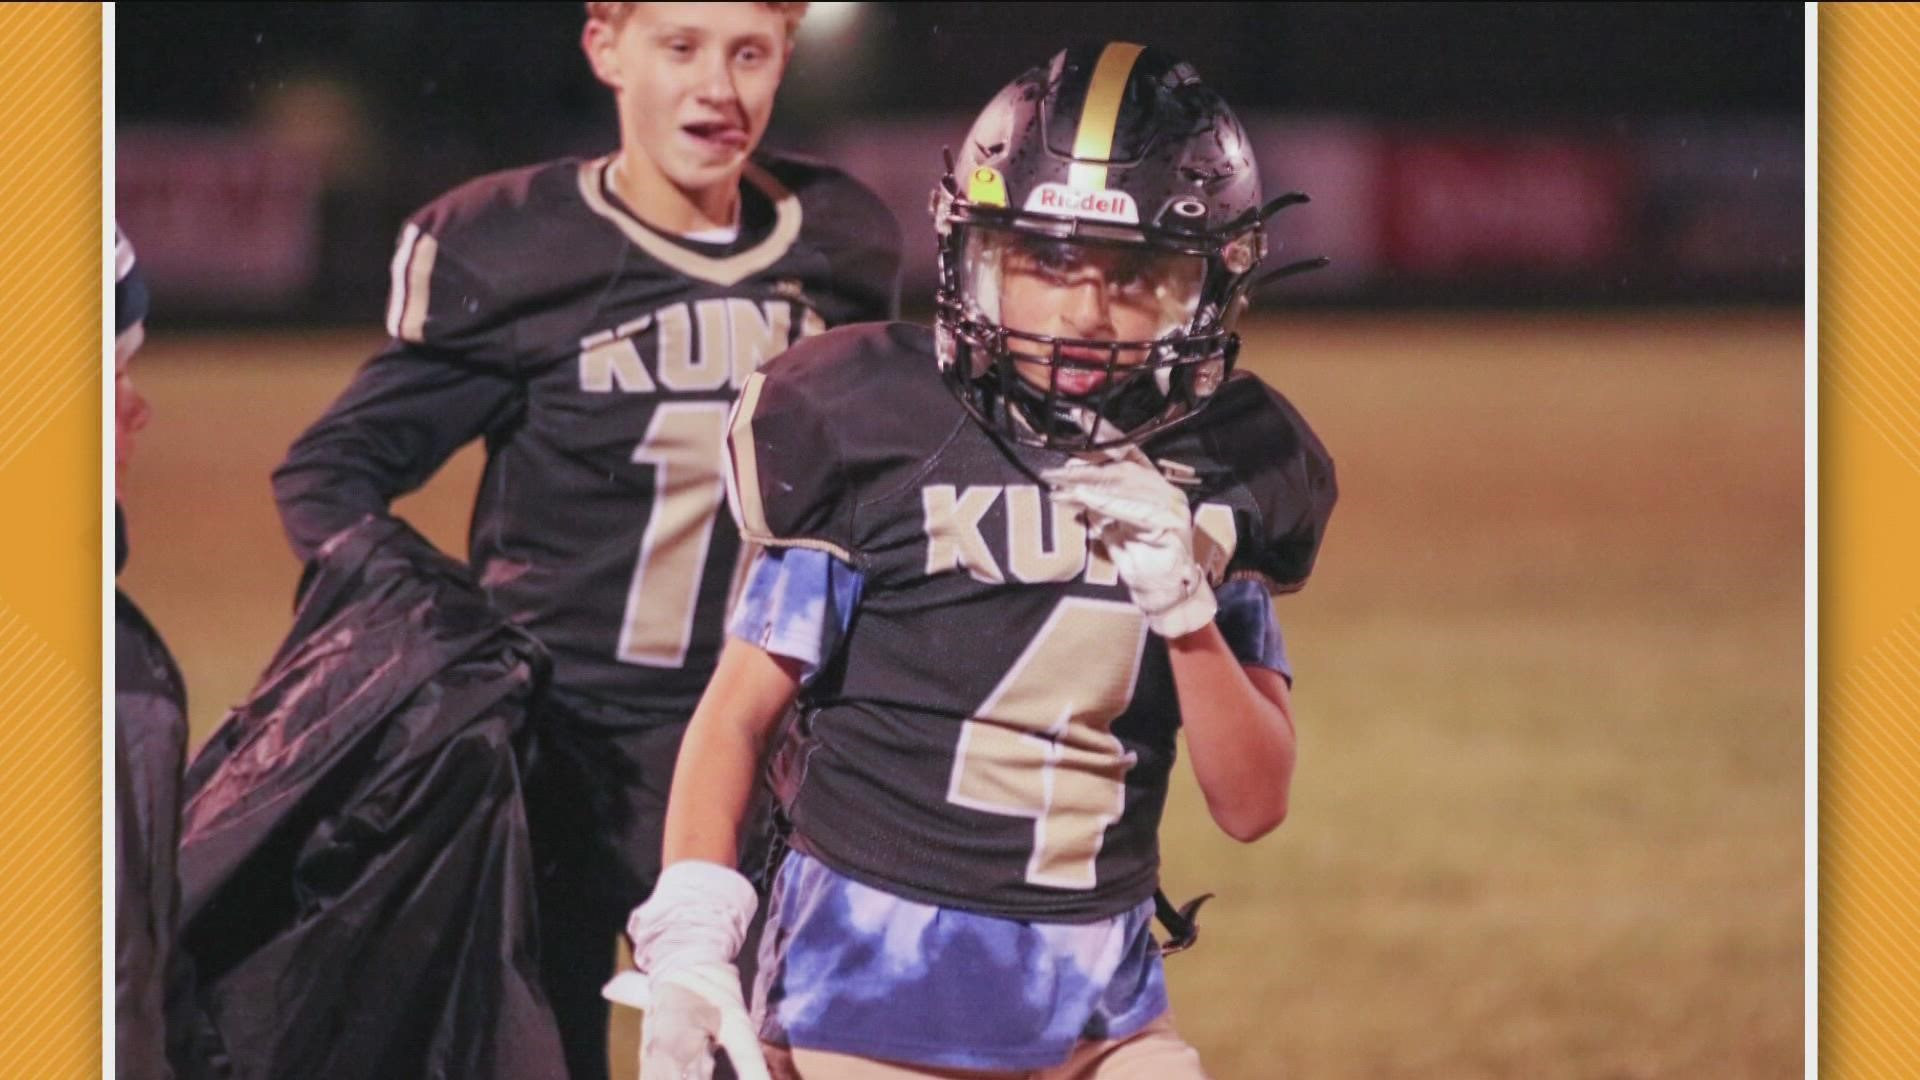 Sione Smith has medical conditions that prevent him from playing sports. The Kuna High football team came up with a plan to do something special for him.